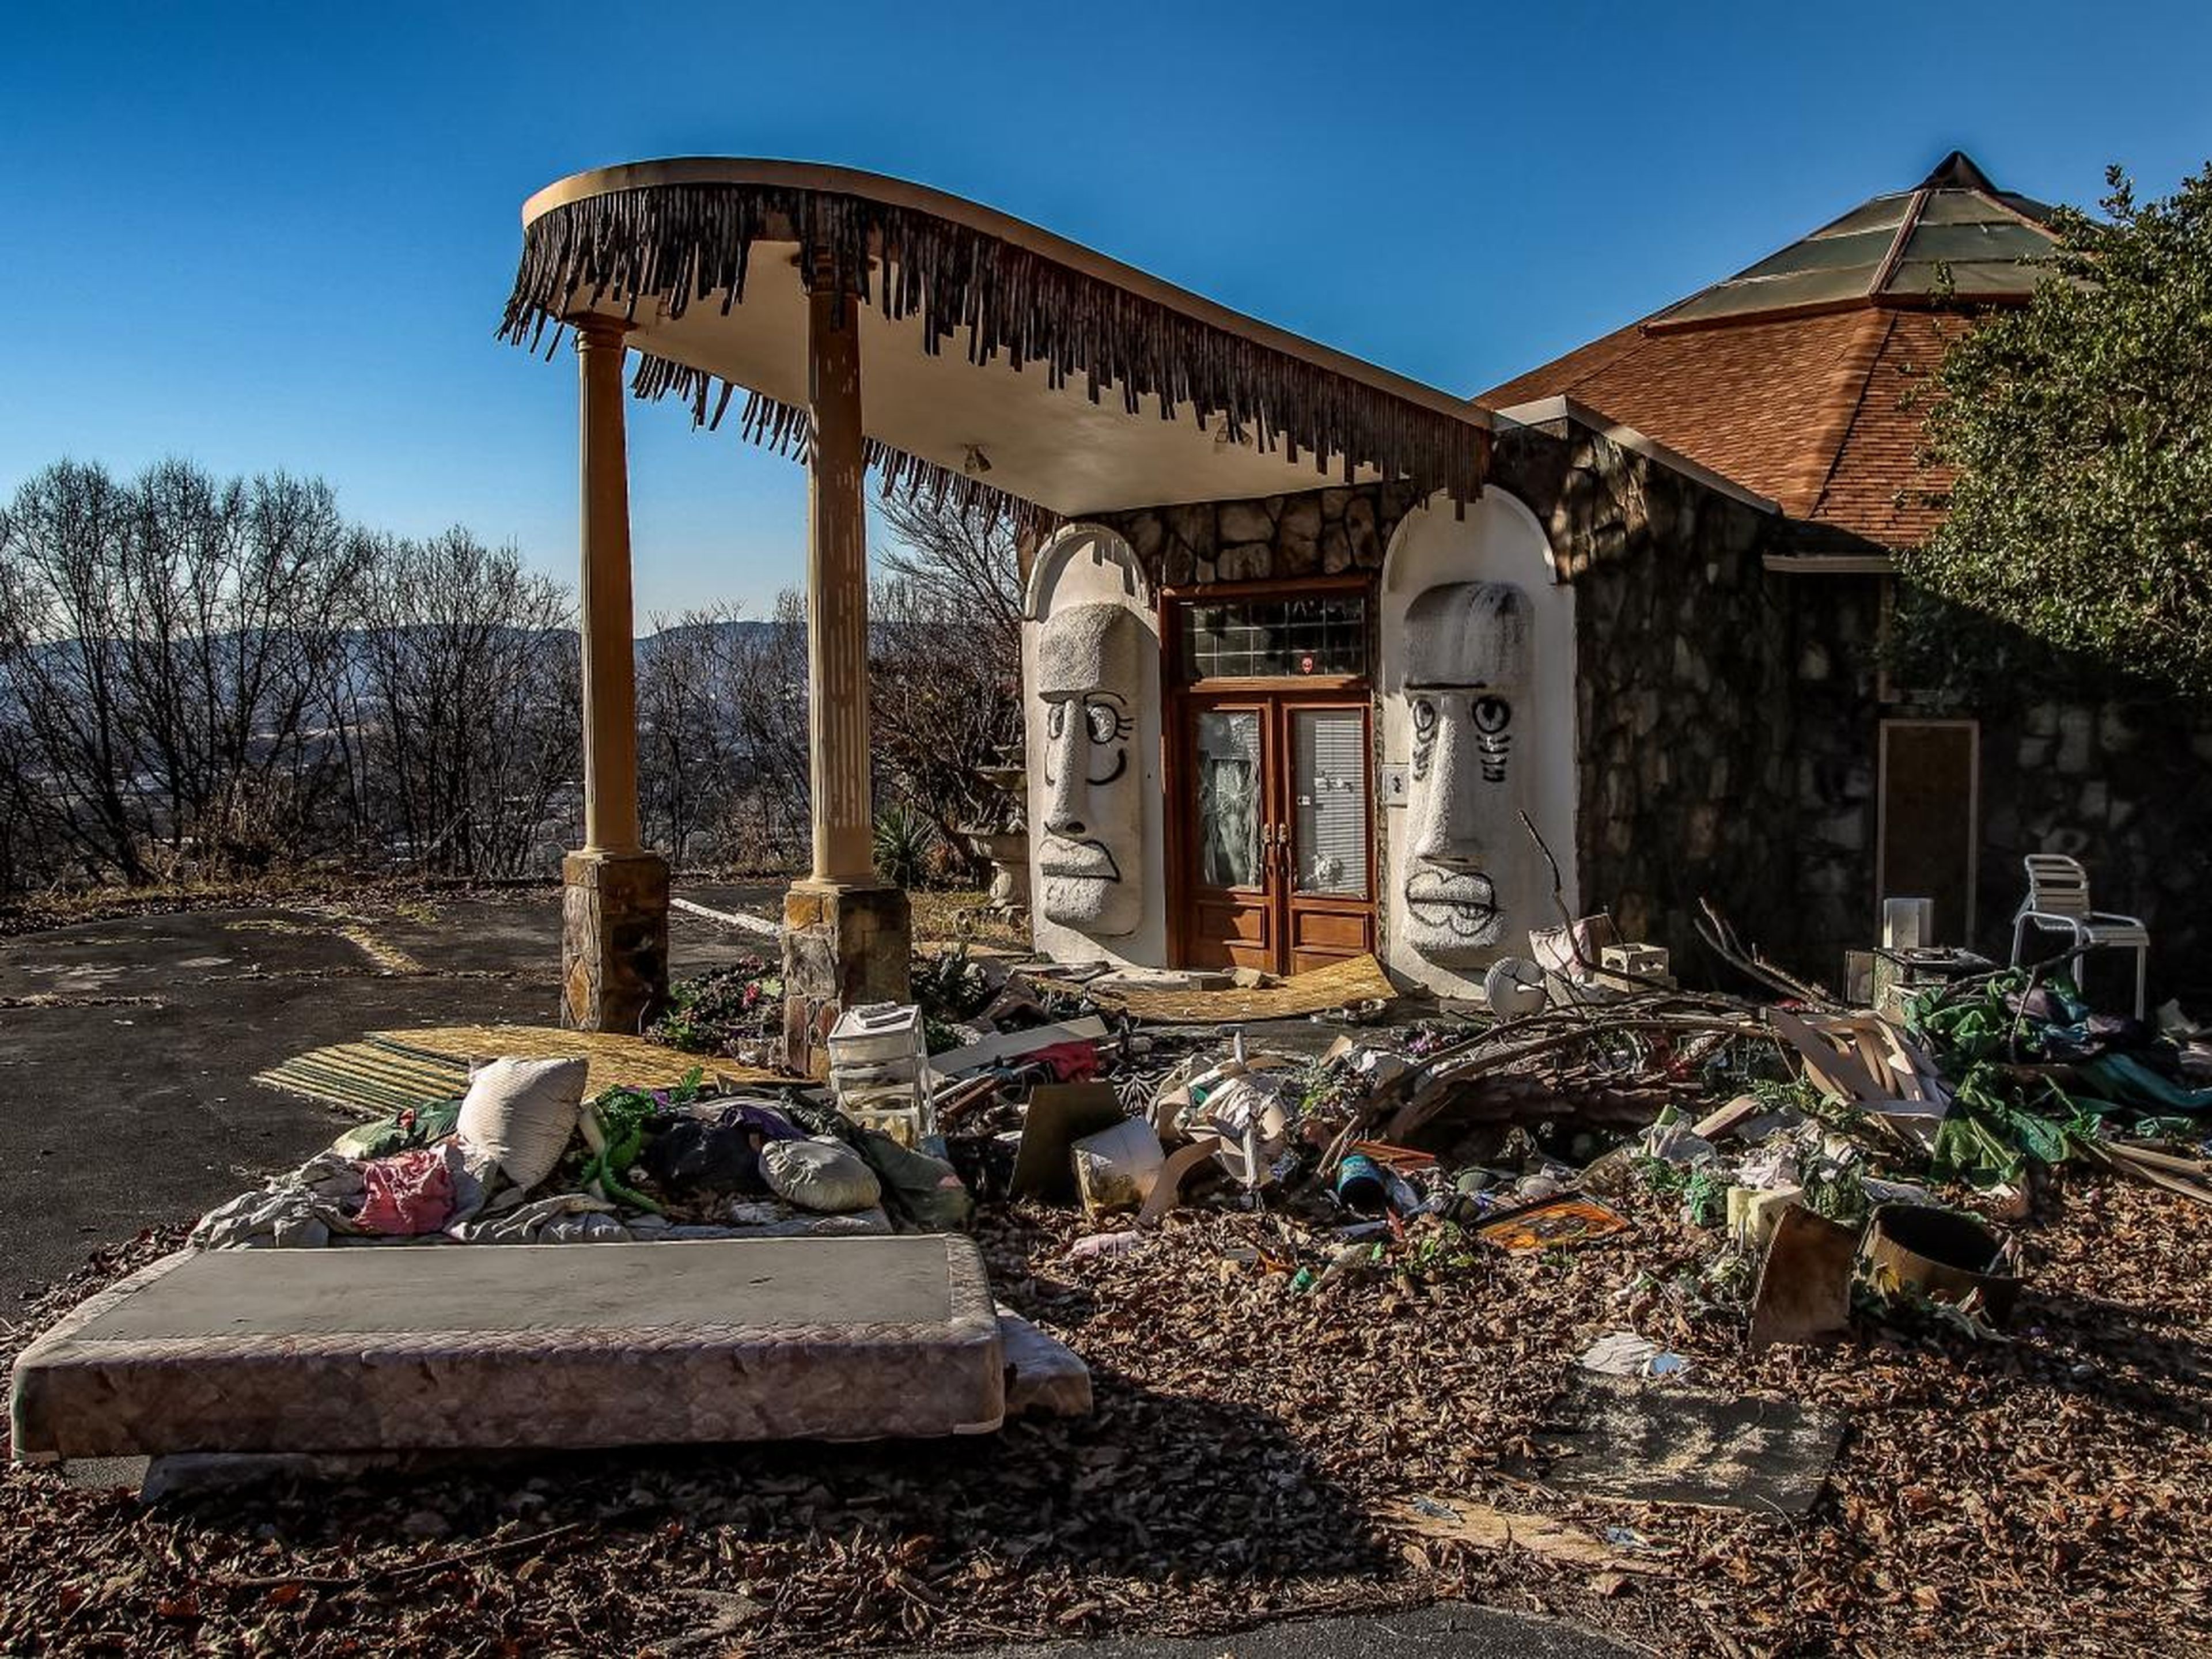 This "Swingers Tiki Palace," as it was dubbed by one photographer, in Chattanooga, Tennessee, was built in 1972 by strip-club tycoon Billy Hull to be the ultimate party palace.